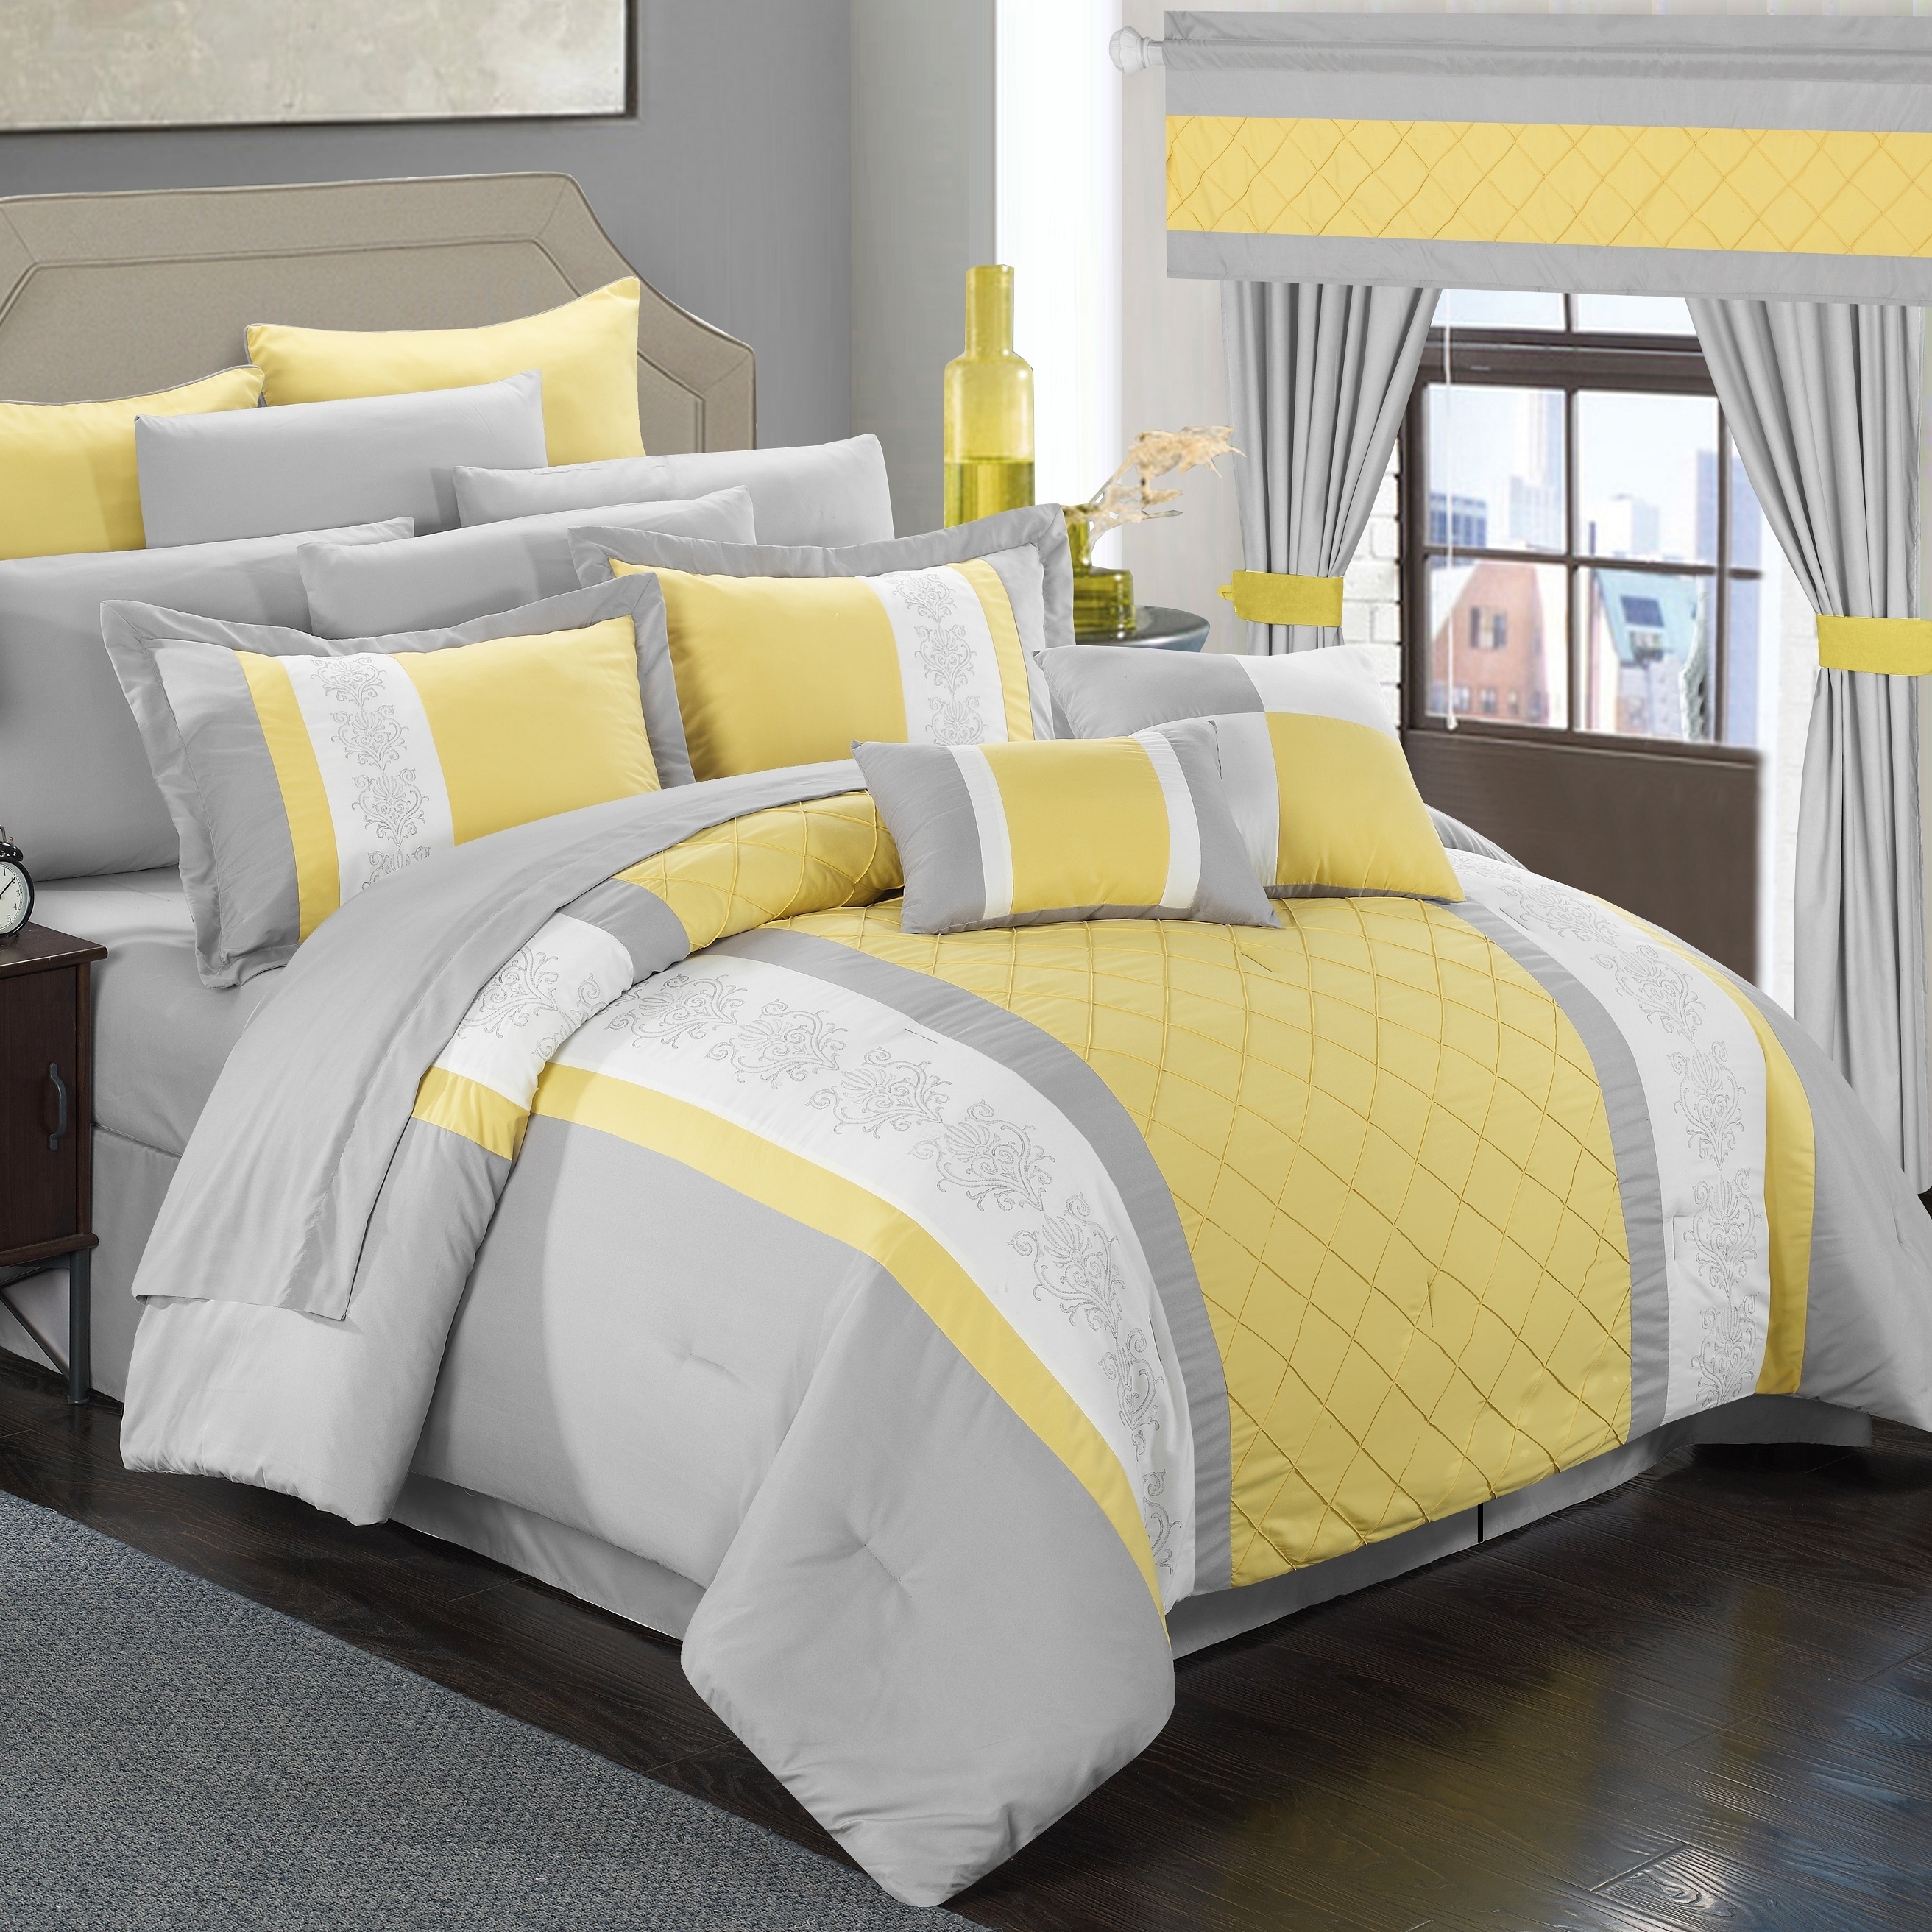 24 Piece Marlington Complete Pin Tuck Embroidery Bedding Comforter Set - Yellow, Queen